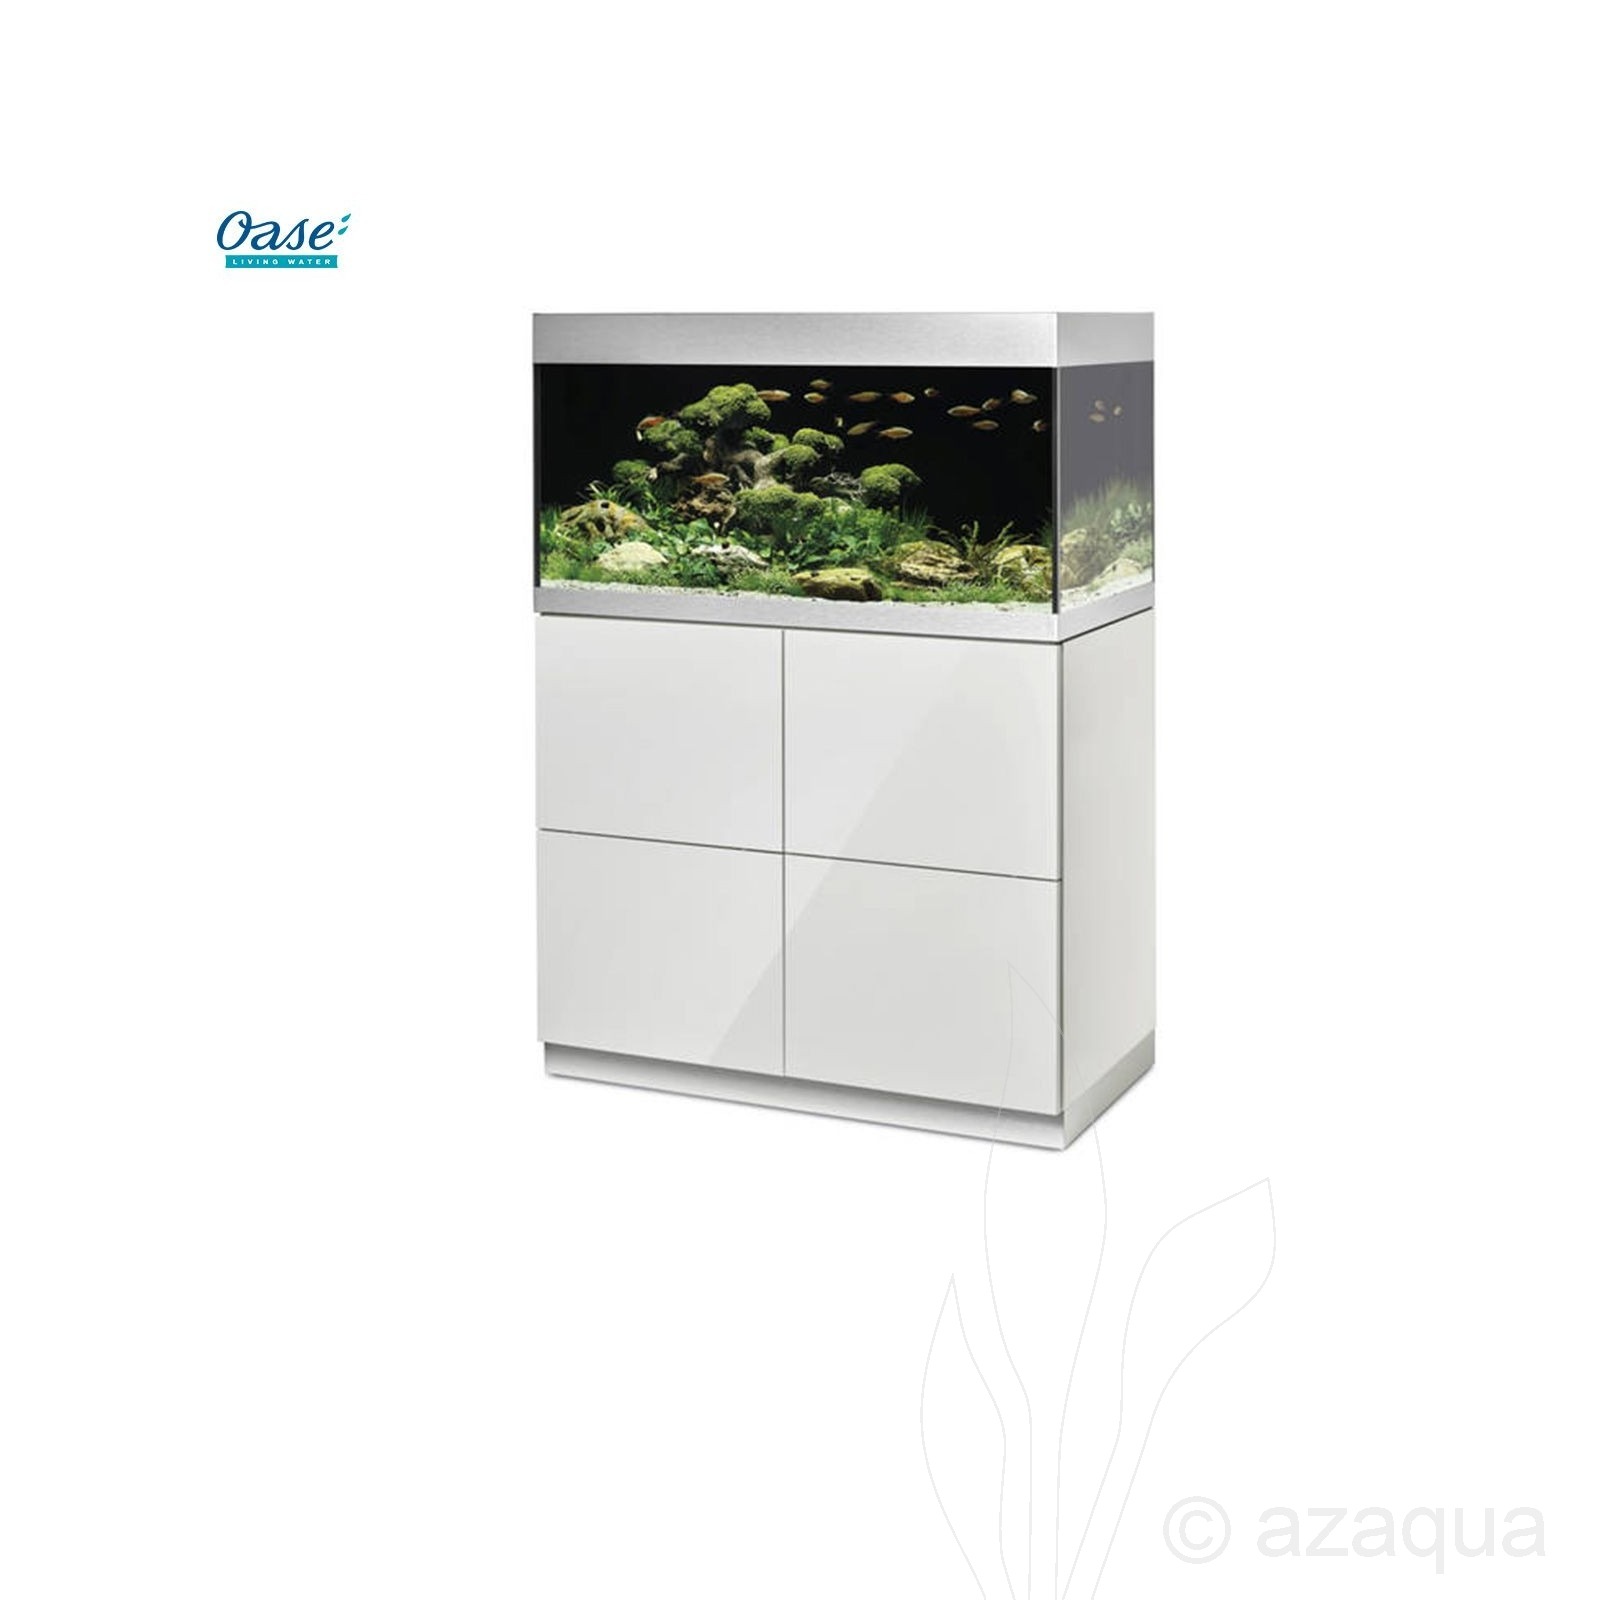 Oasis Features a 200-white